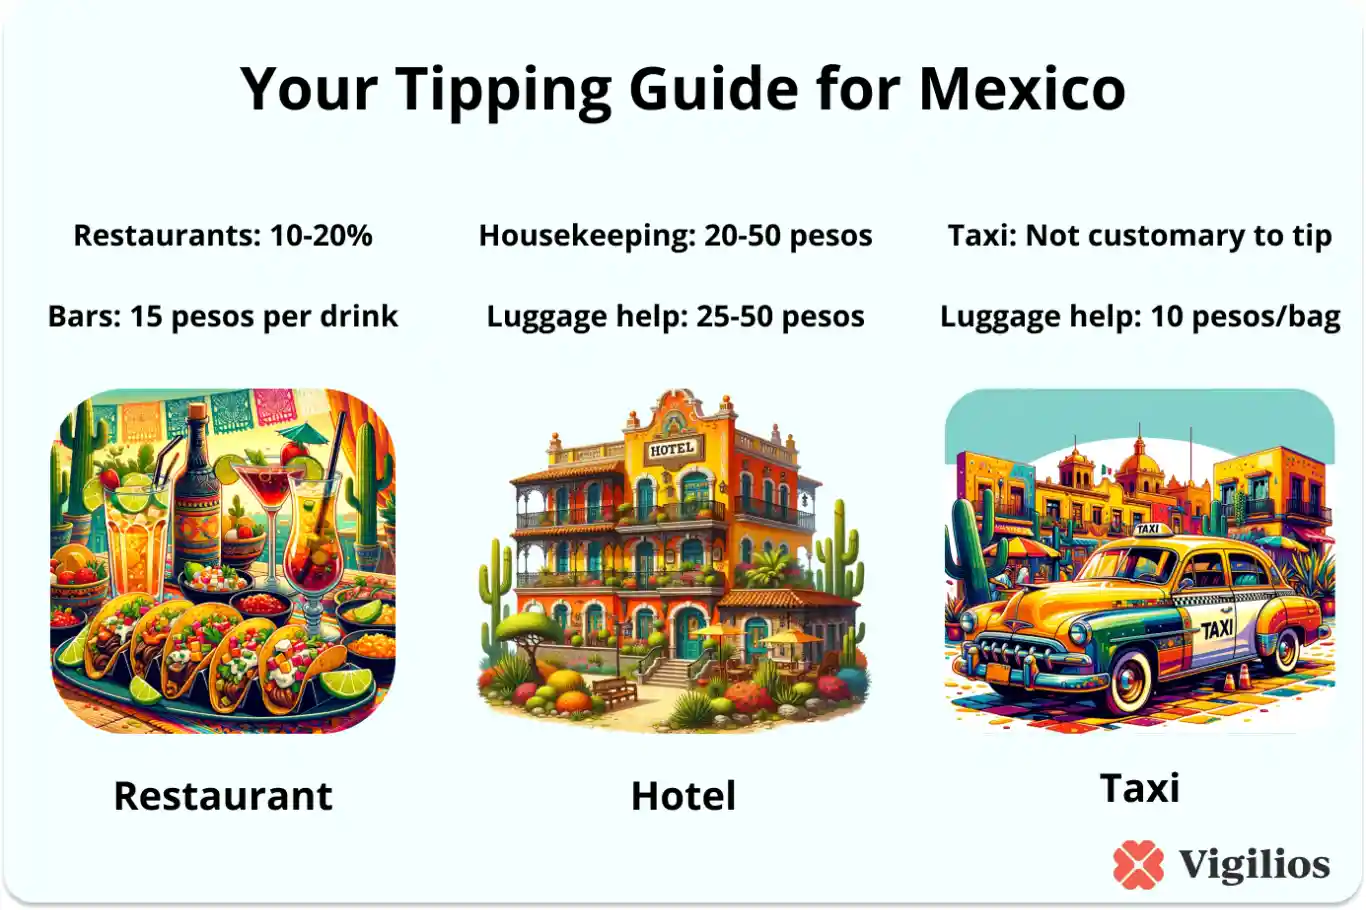 Illustrative cheat sheet showing recommended tipping percentages in different service situations, including at restaurants, in hotels, and during taxi rides